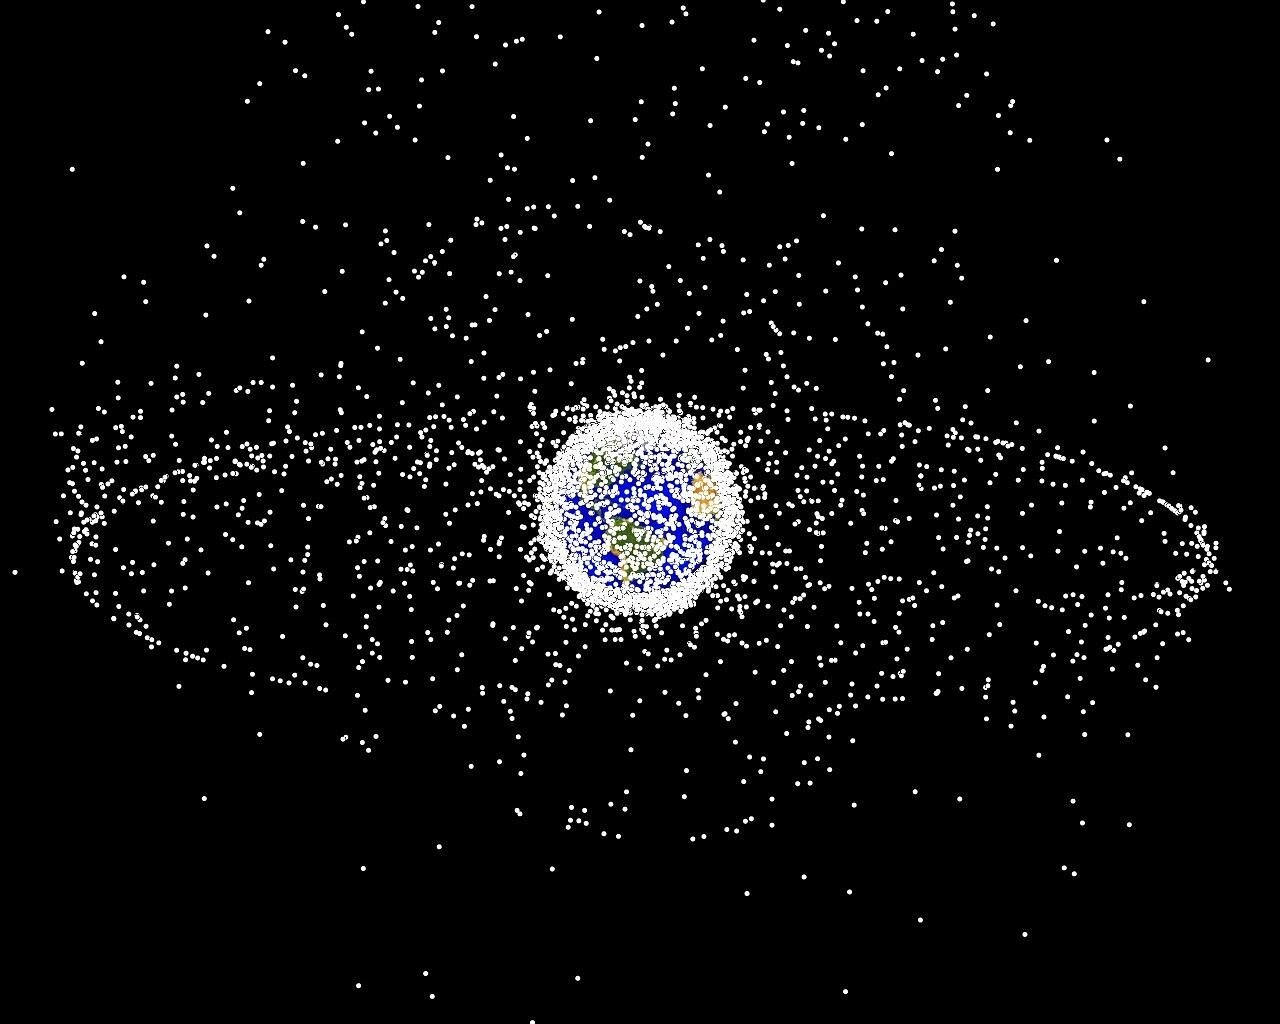 Dealing with space debris